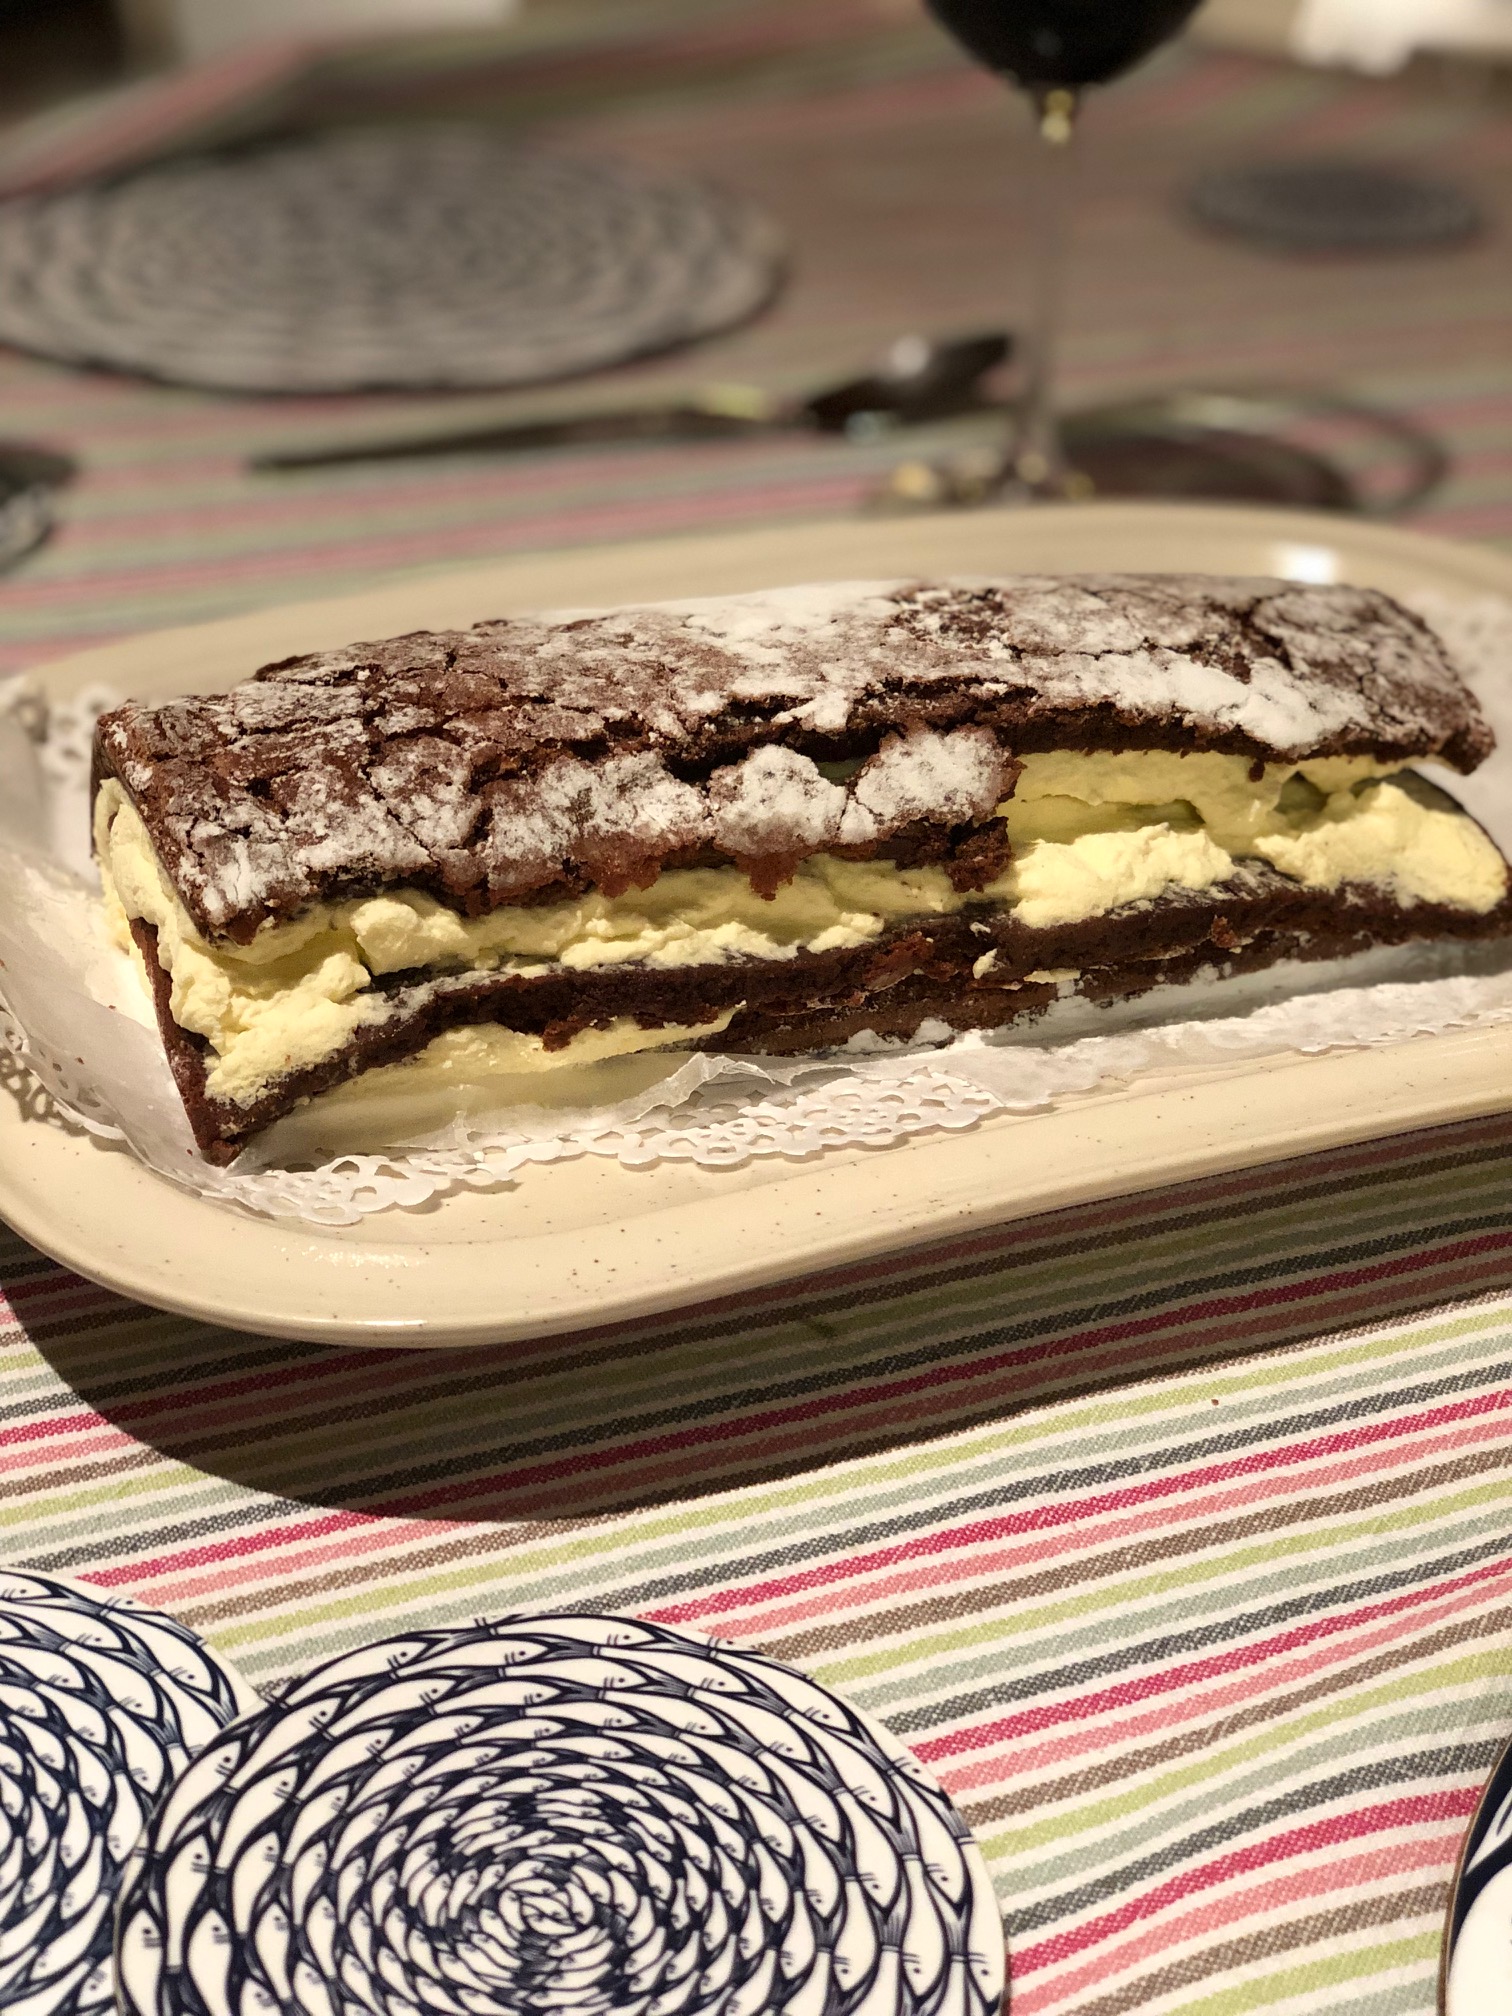 Barbara’s chocolate roulade – My copper pot